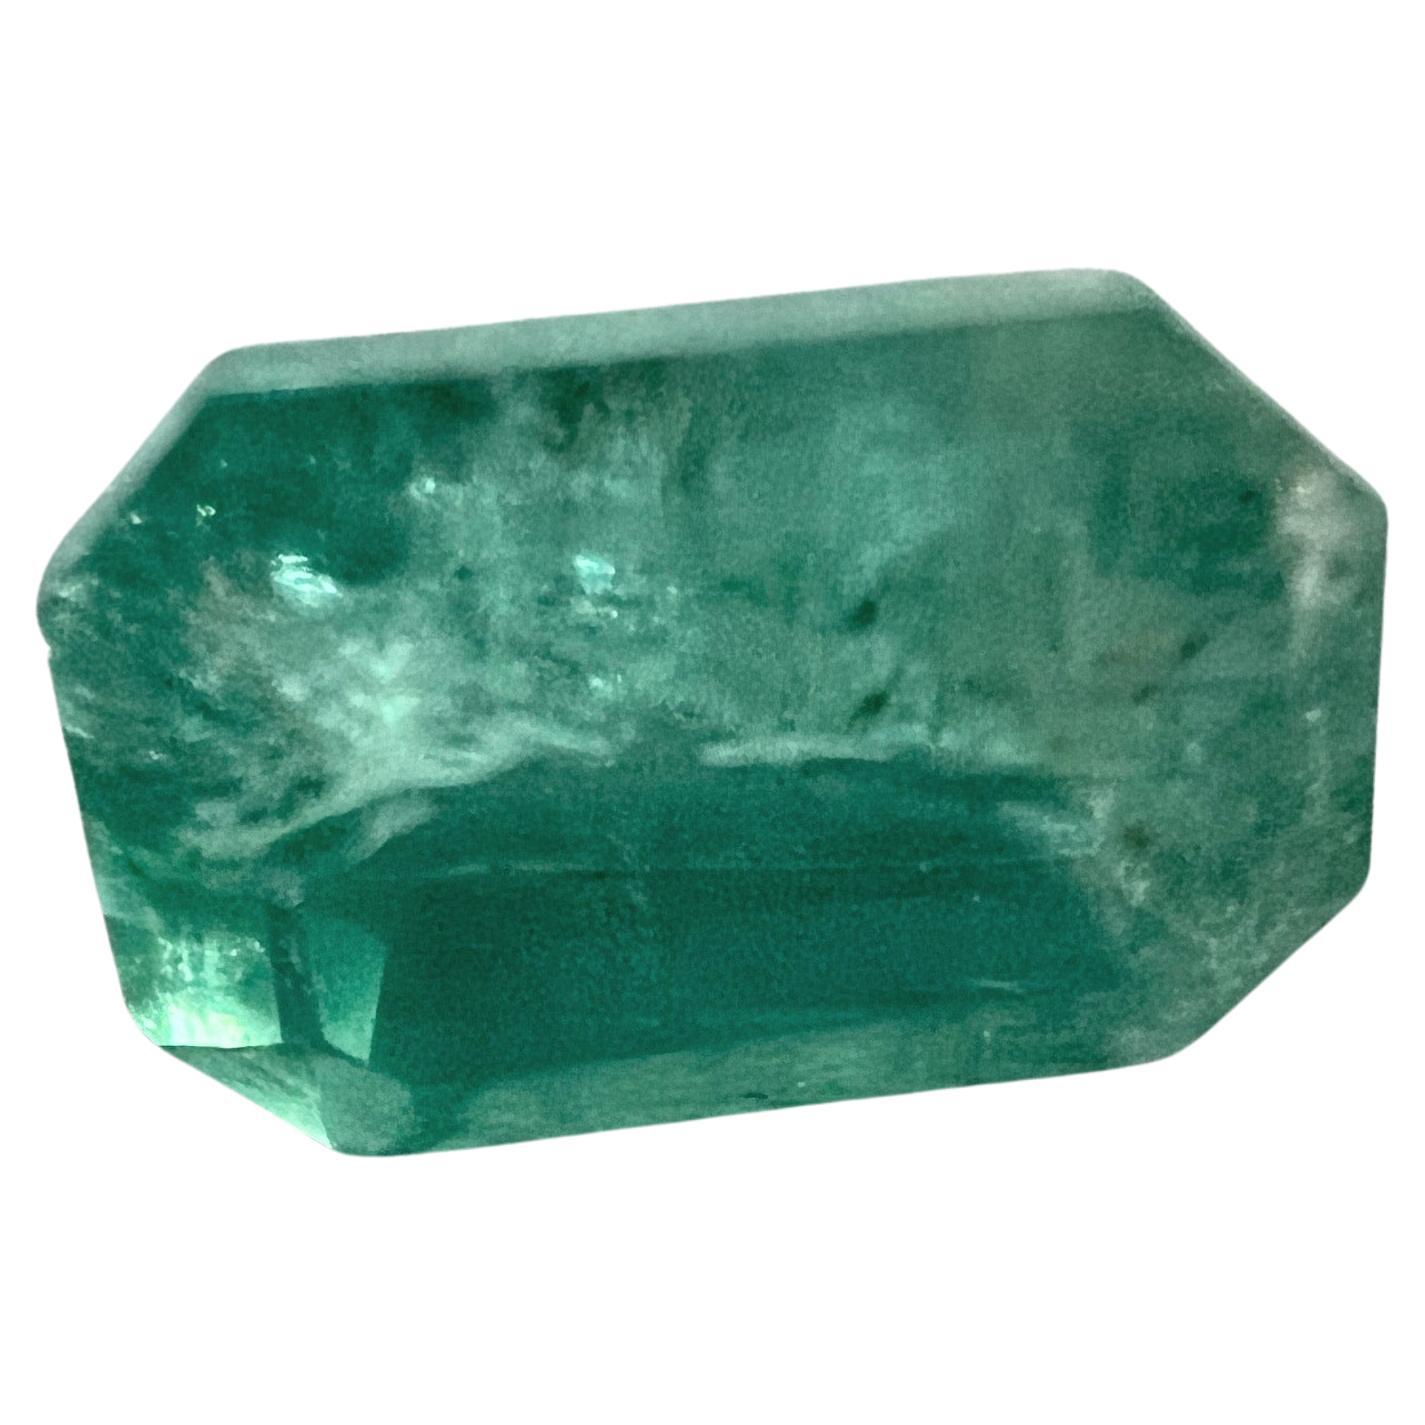 NO RESERVE 1.45ct Emerald Cut NON-OILED EMERALD Gemstone  In New Condition For Sale In Sheridan, WY